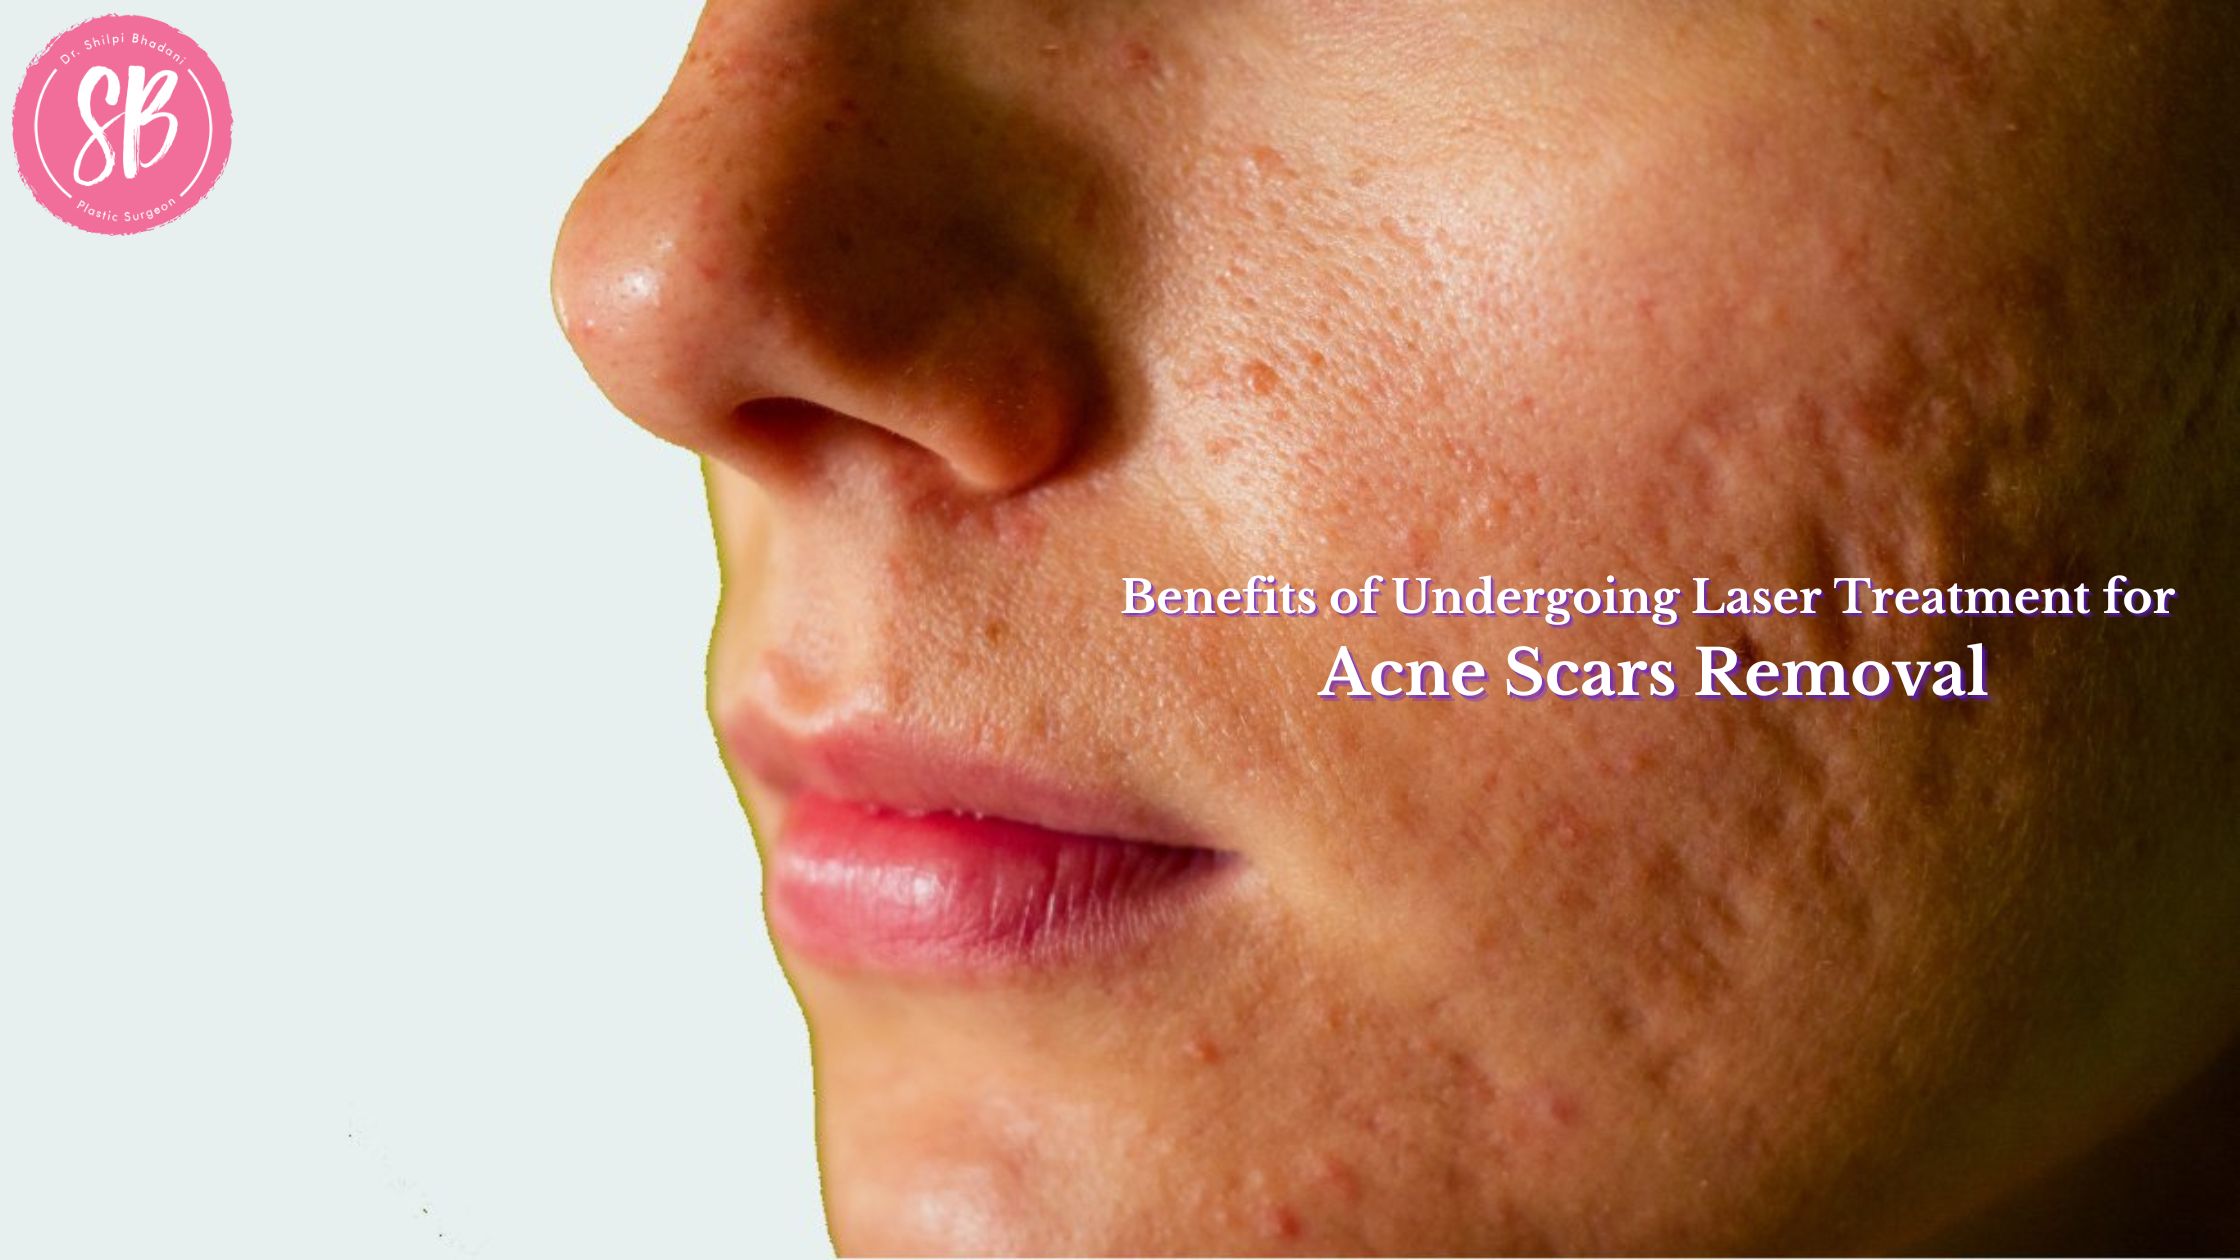 Benefits of Undergoing Laser Treatment for Acne Scars Removal